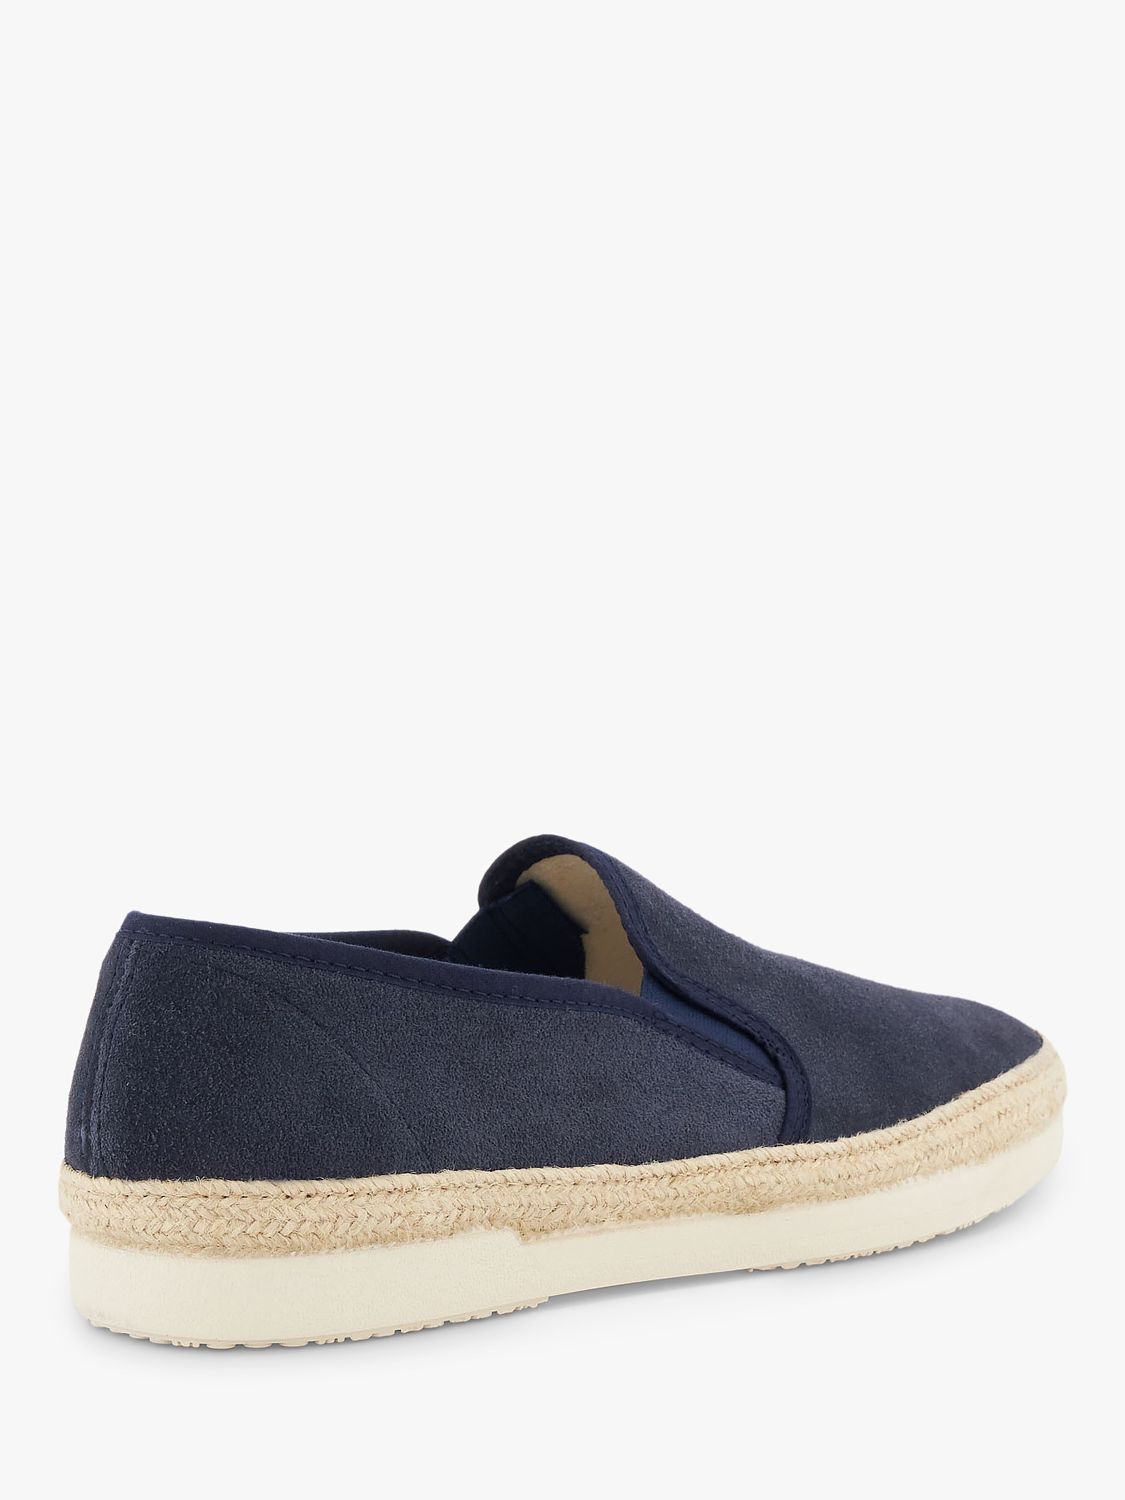 Dune Fall Suede Woven Detail Espadrille Shoes, Navy-suede at John Lewis ...